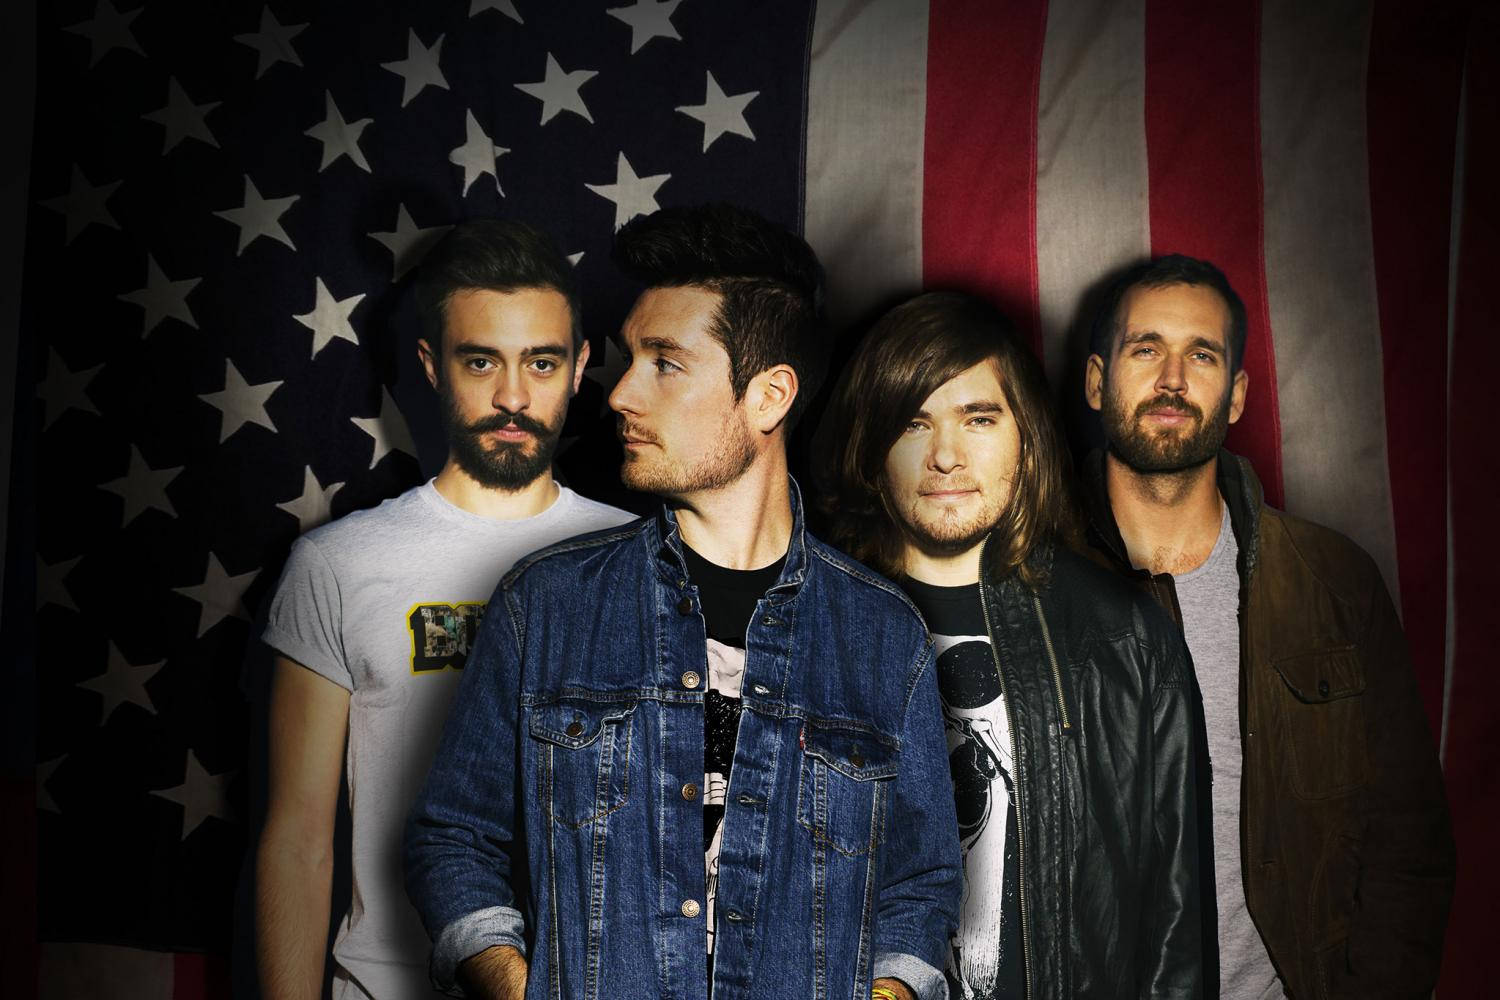 Bastille band posing with a union jack flag Wallpaper